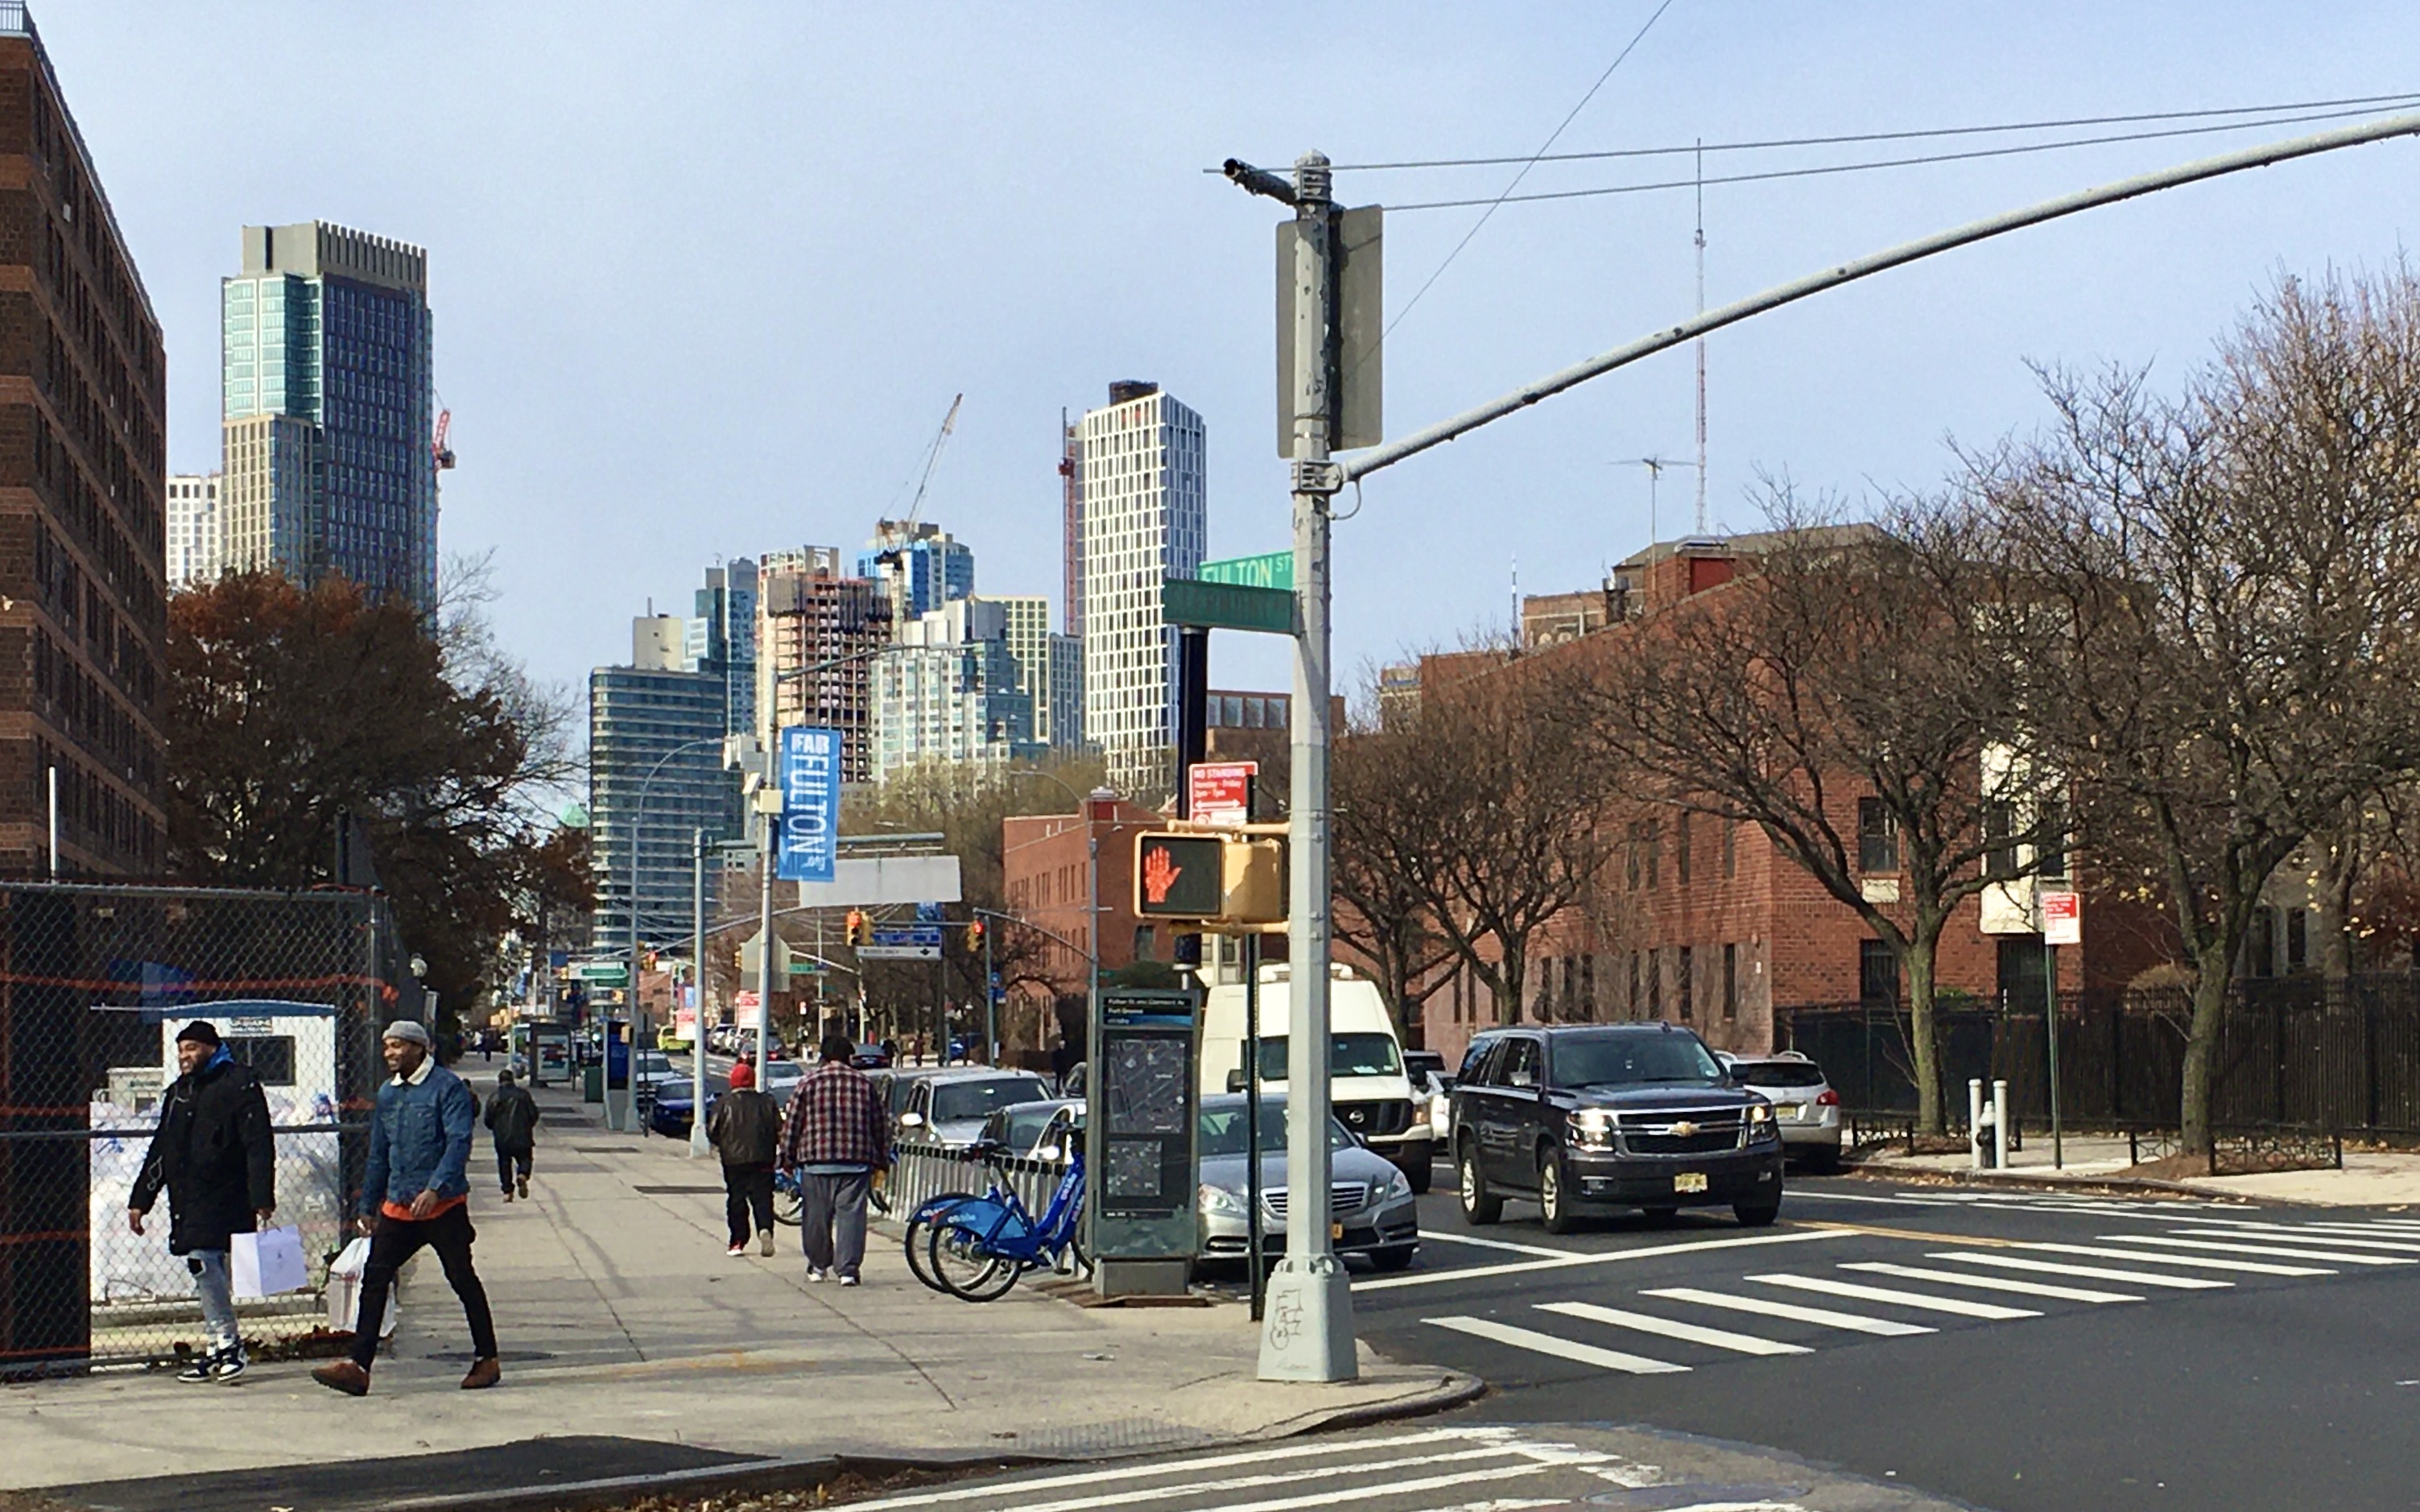 Gates Avenue starts here at this Clinton Hill intersection. Photo: Lore Croghan/Brooklyn Eagle